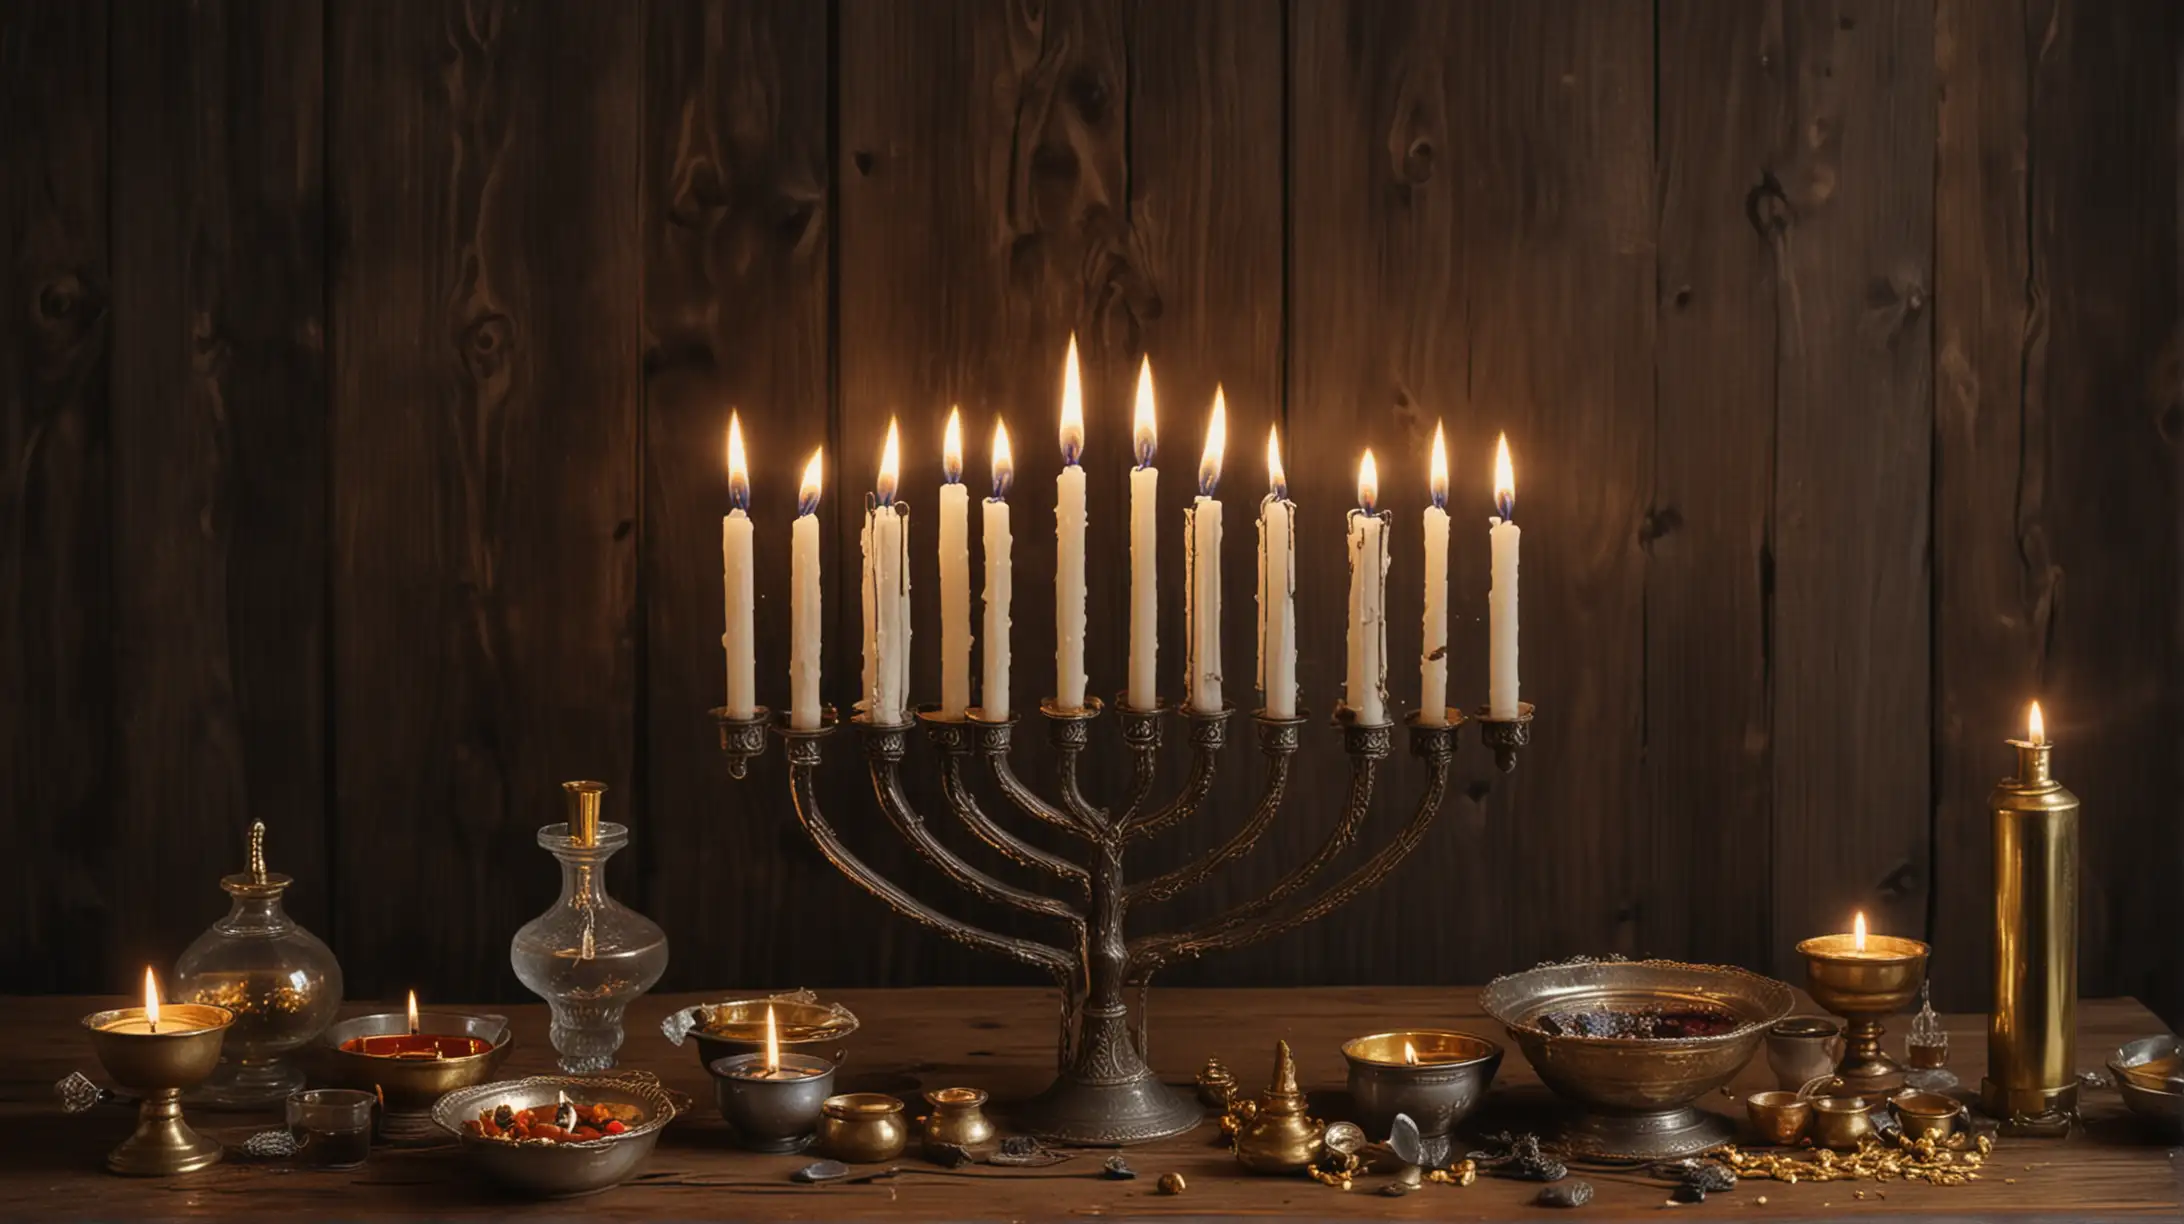 Traditional Menorah with Lit Candles and Incense on Wooden Table